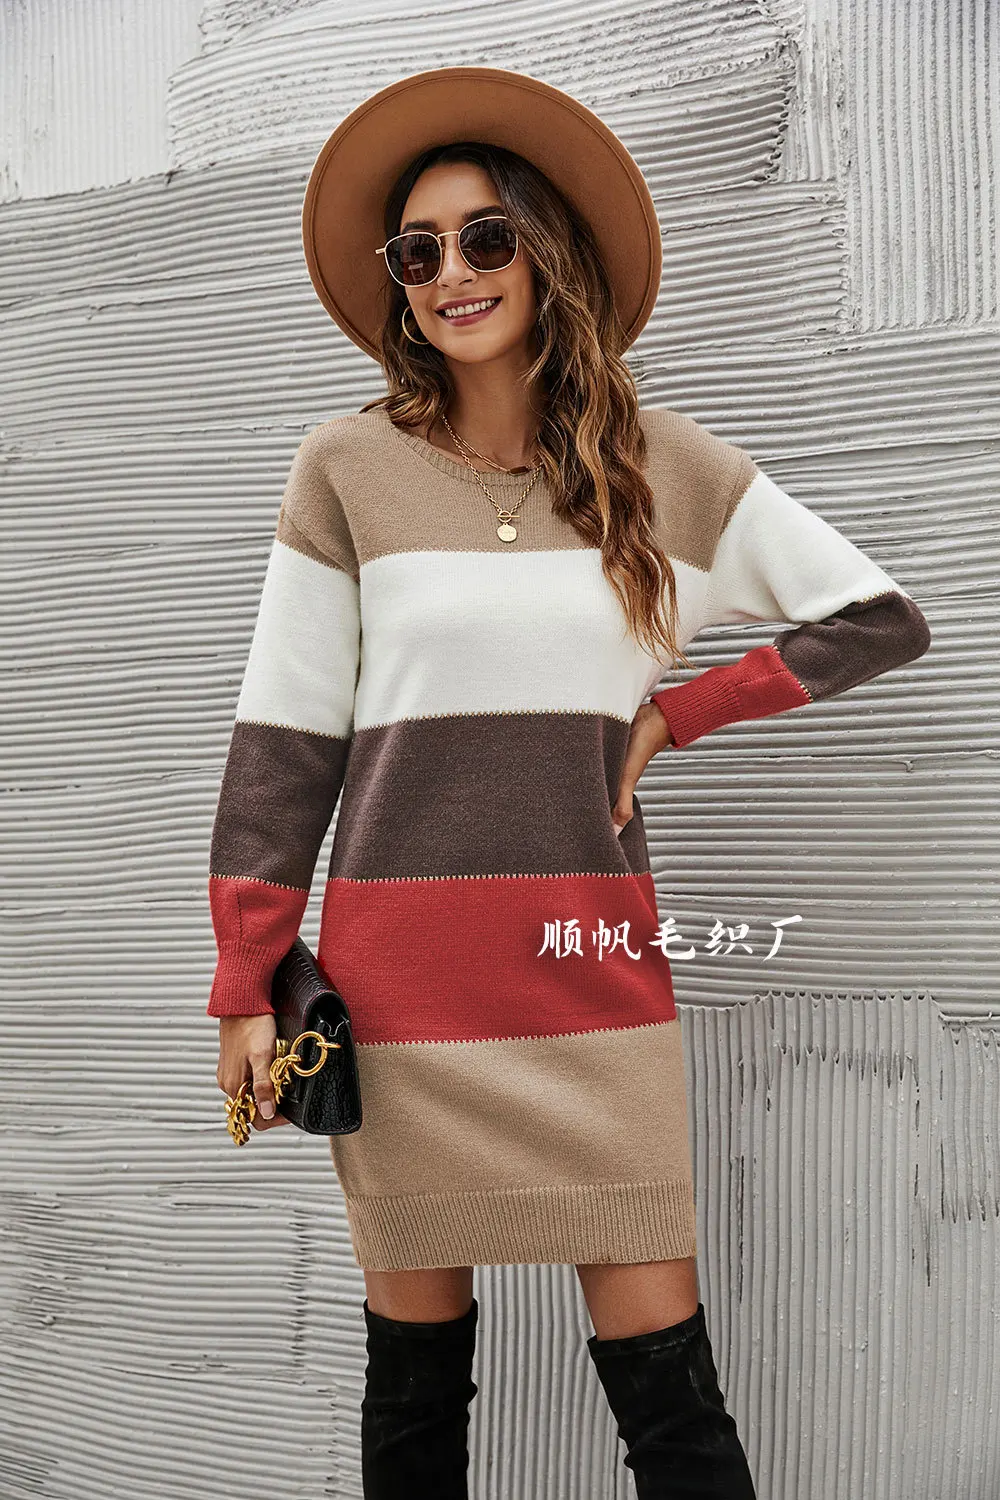 New Arrival Women Clothes Autumn Winter New Color Contrast Round Neck Knitwear Dress Large Long Sweater Women Top